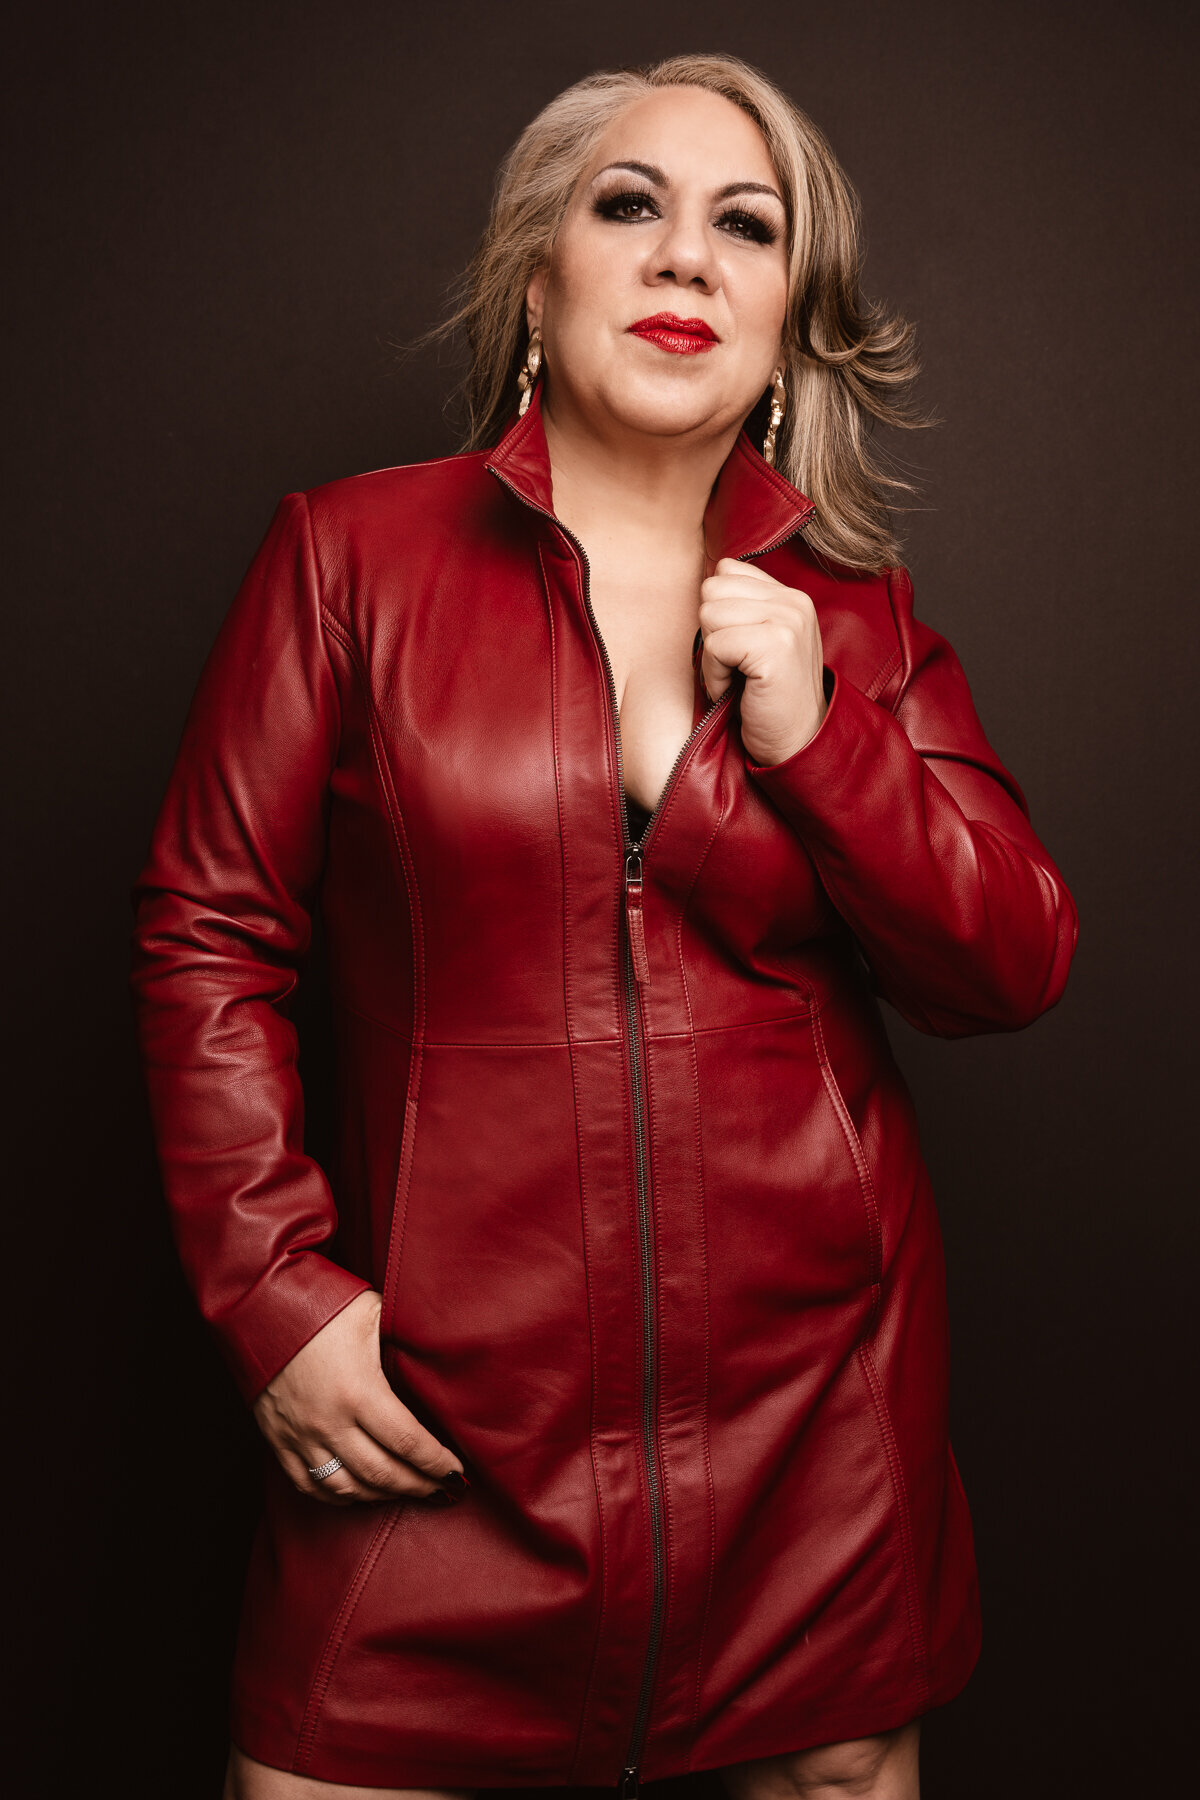 Picture of a mature beautiful woman in a leather red dress